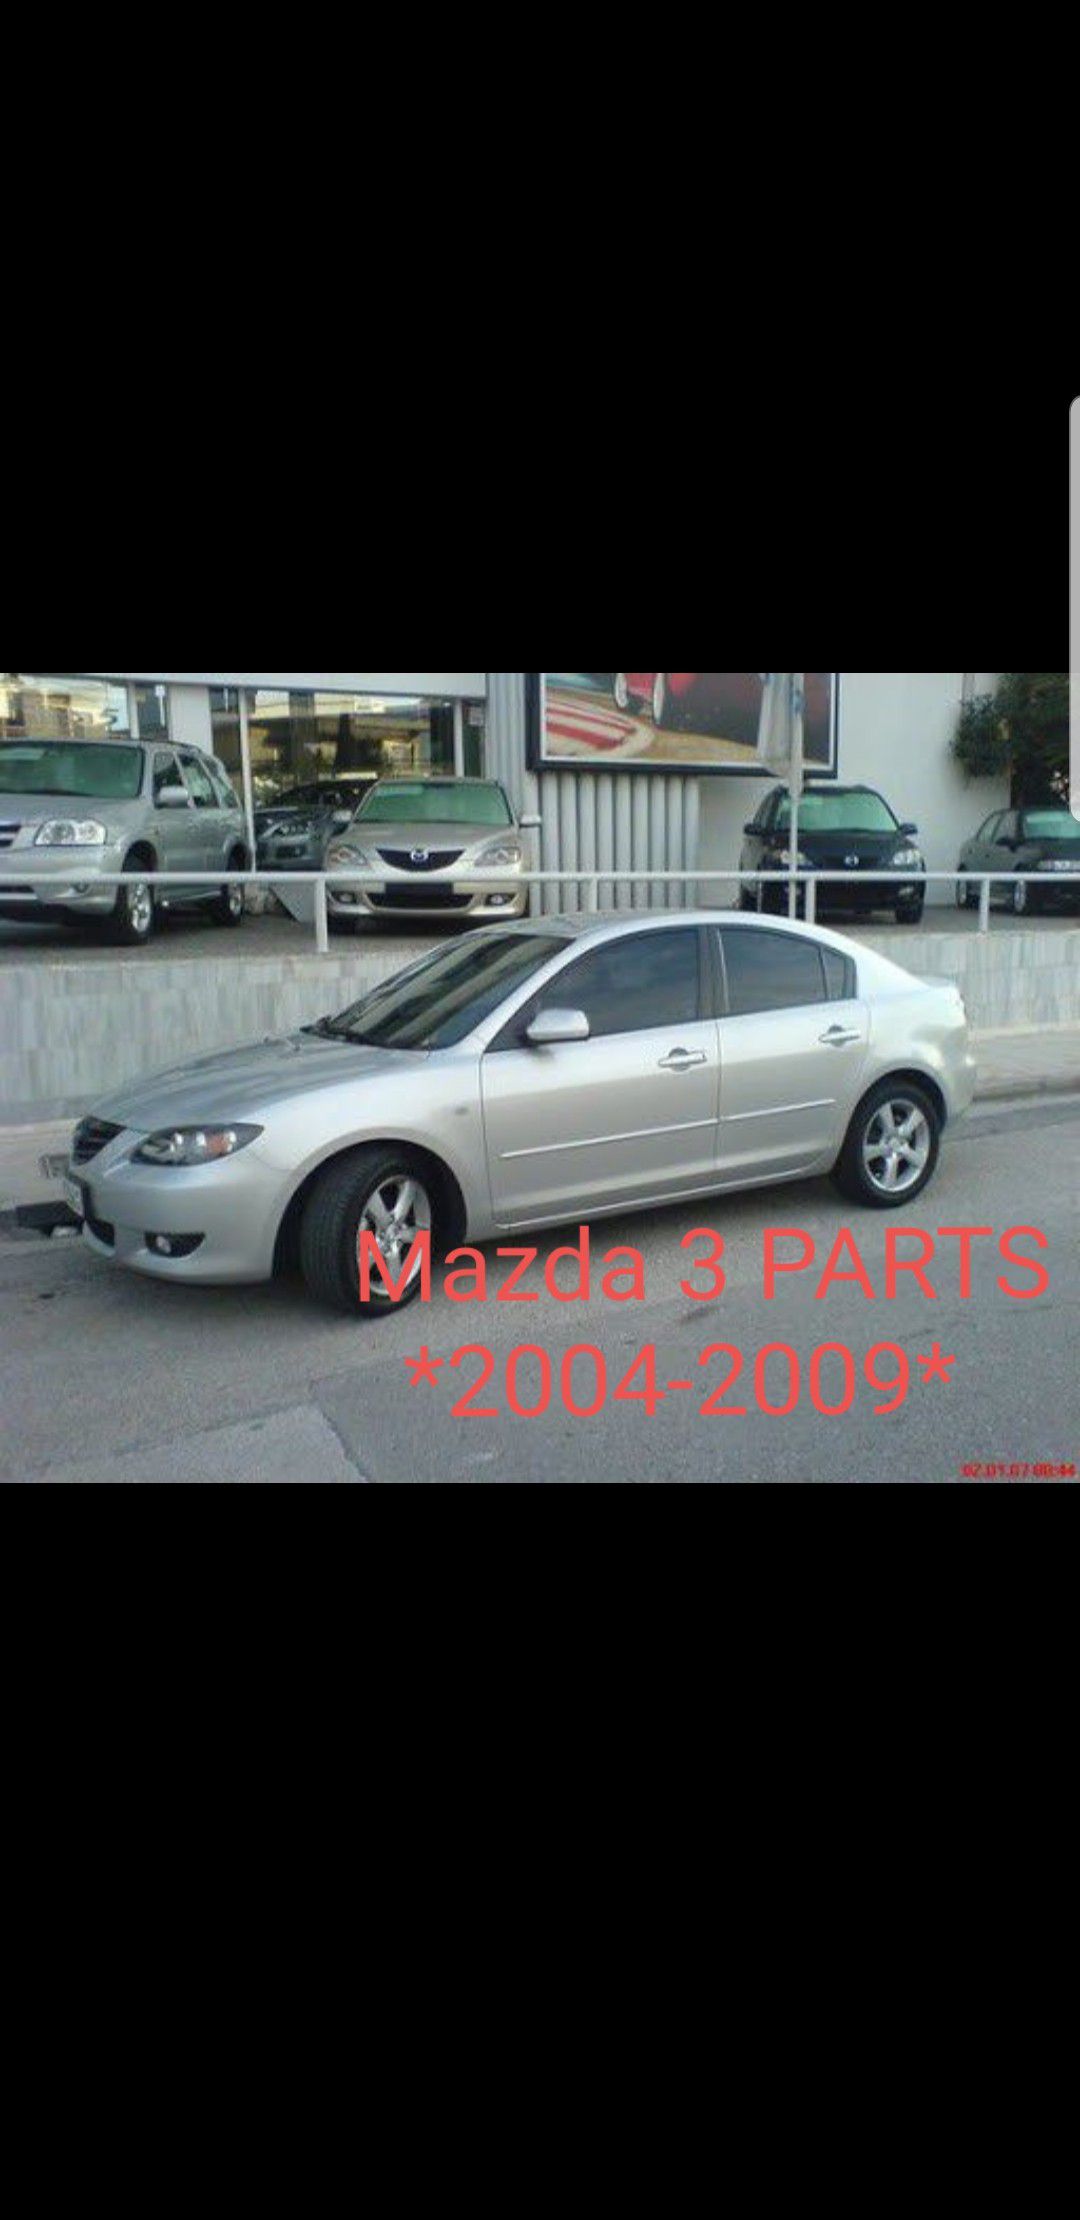 Partes parts only 2004 to 2009 Mazda 3